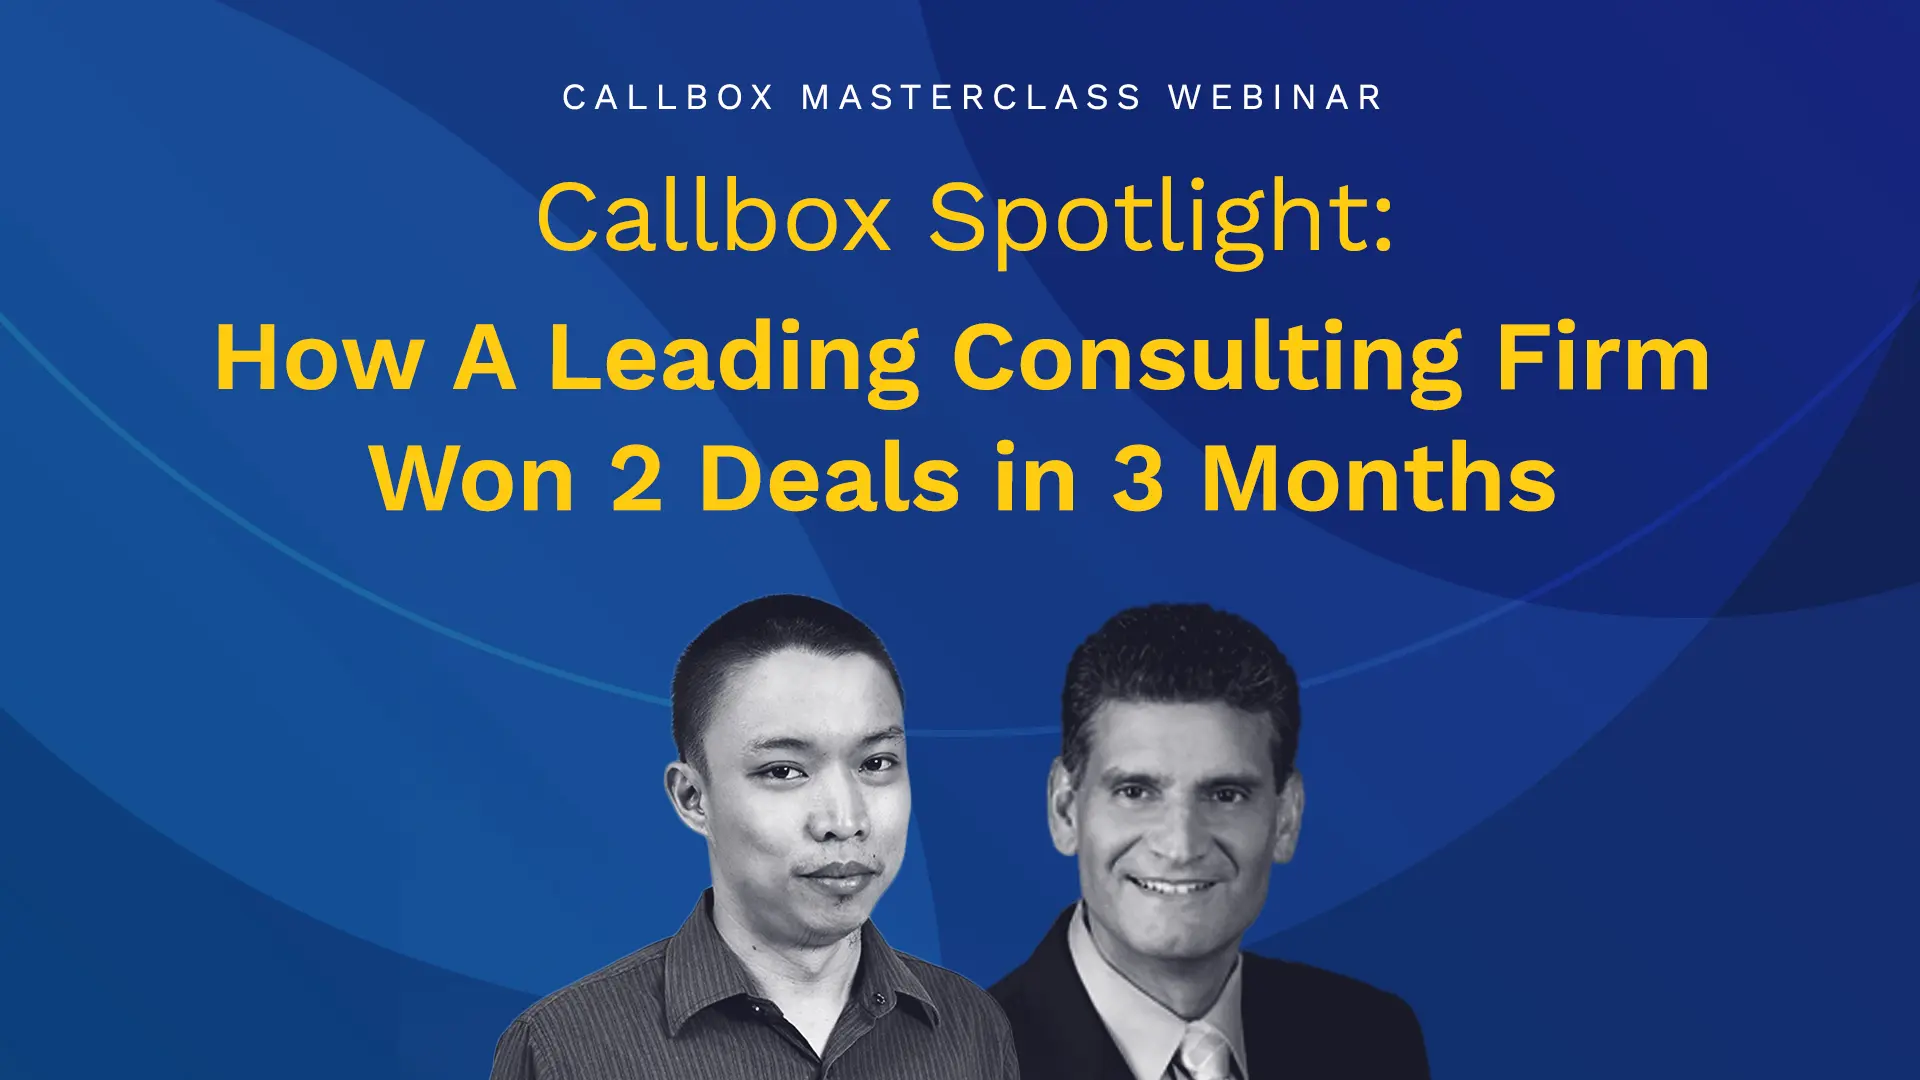 Masterclass webinar Callbox Spotlight: How A Leading Consulting Firm Won 2 Deals in 3 Months